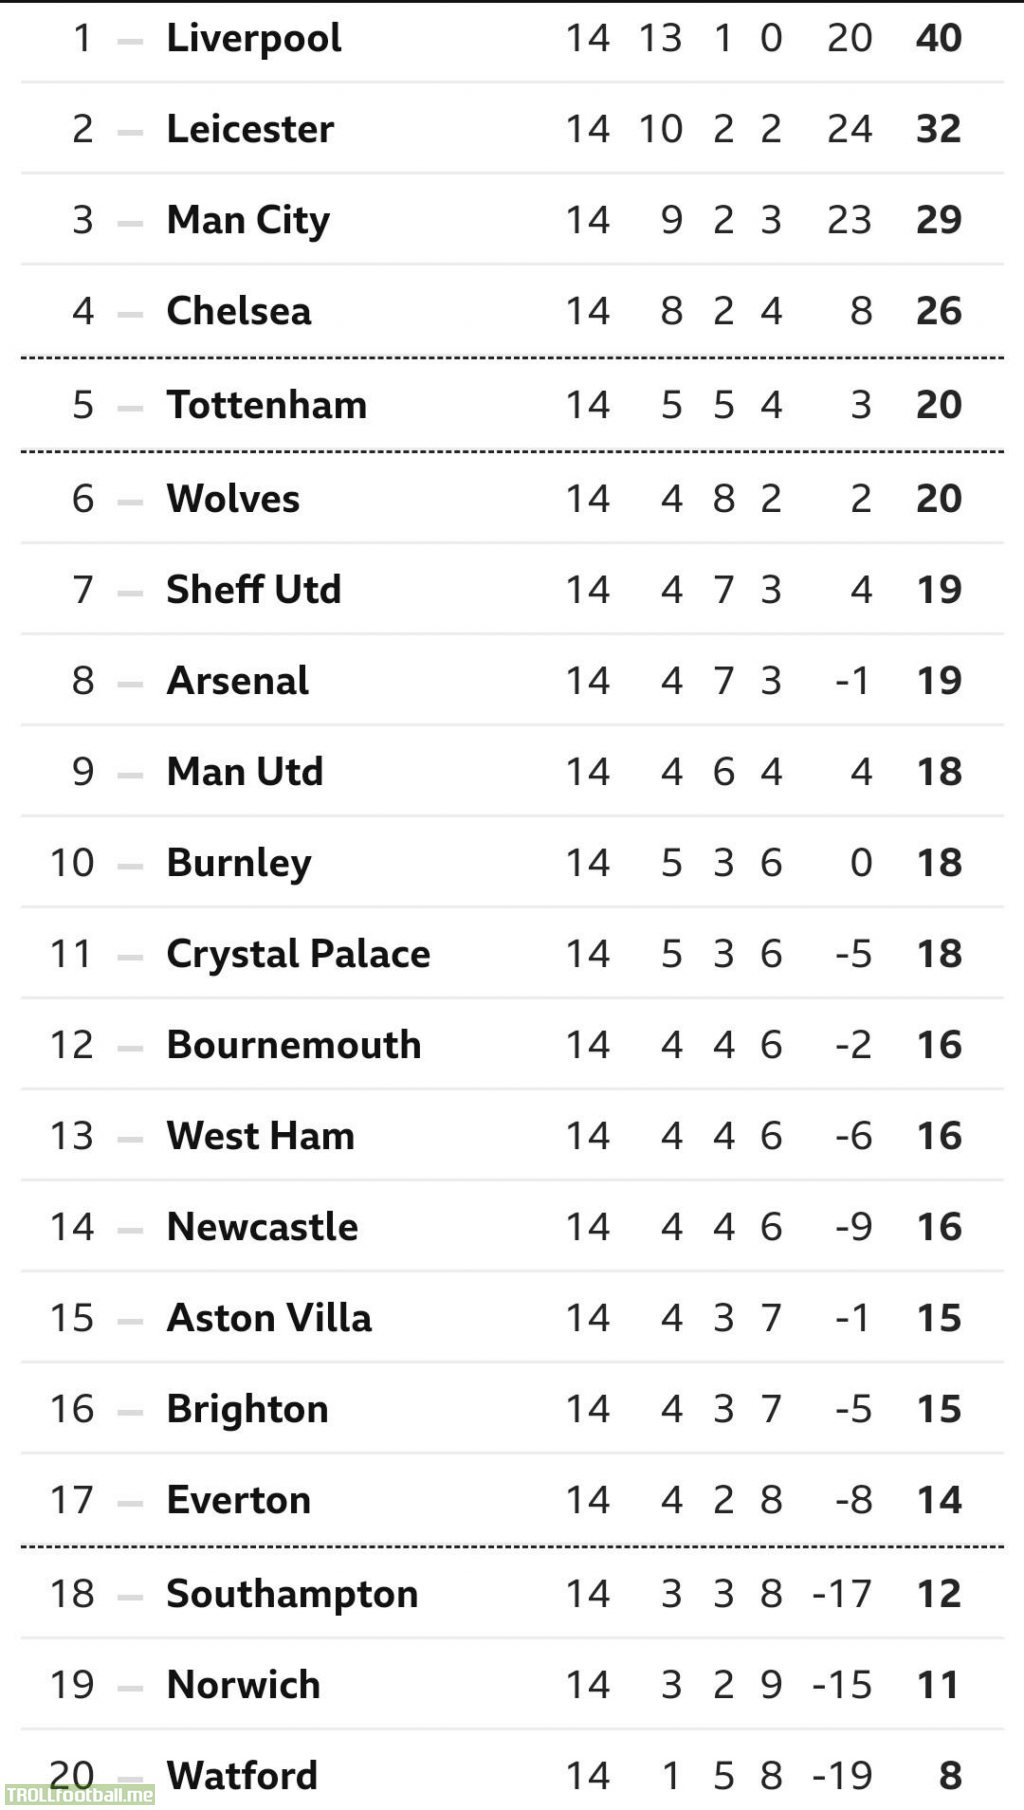 The gap between Liverpool (leaders) and Chelsea (final CL spot) is exactly the same as the gap between Chelsea and Southampton (relegation zone) - 14 points.